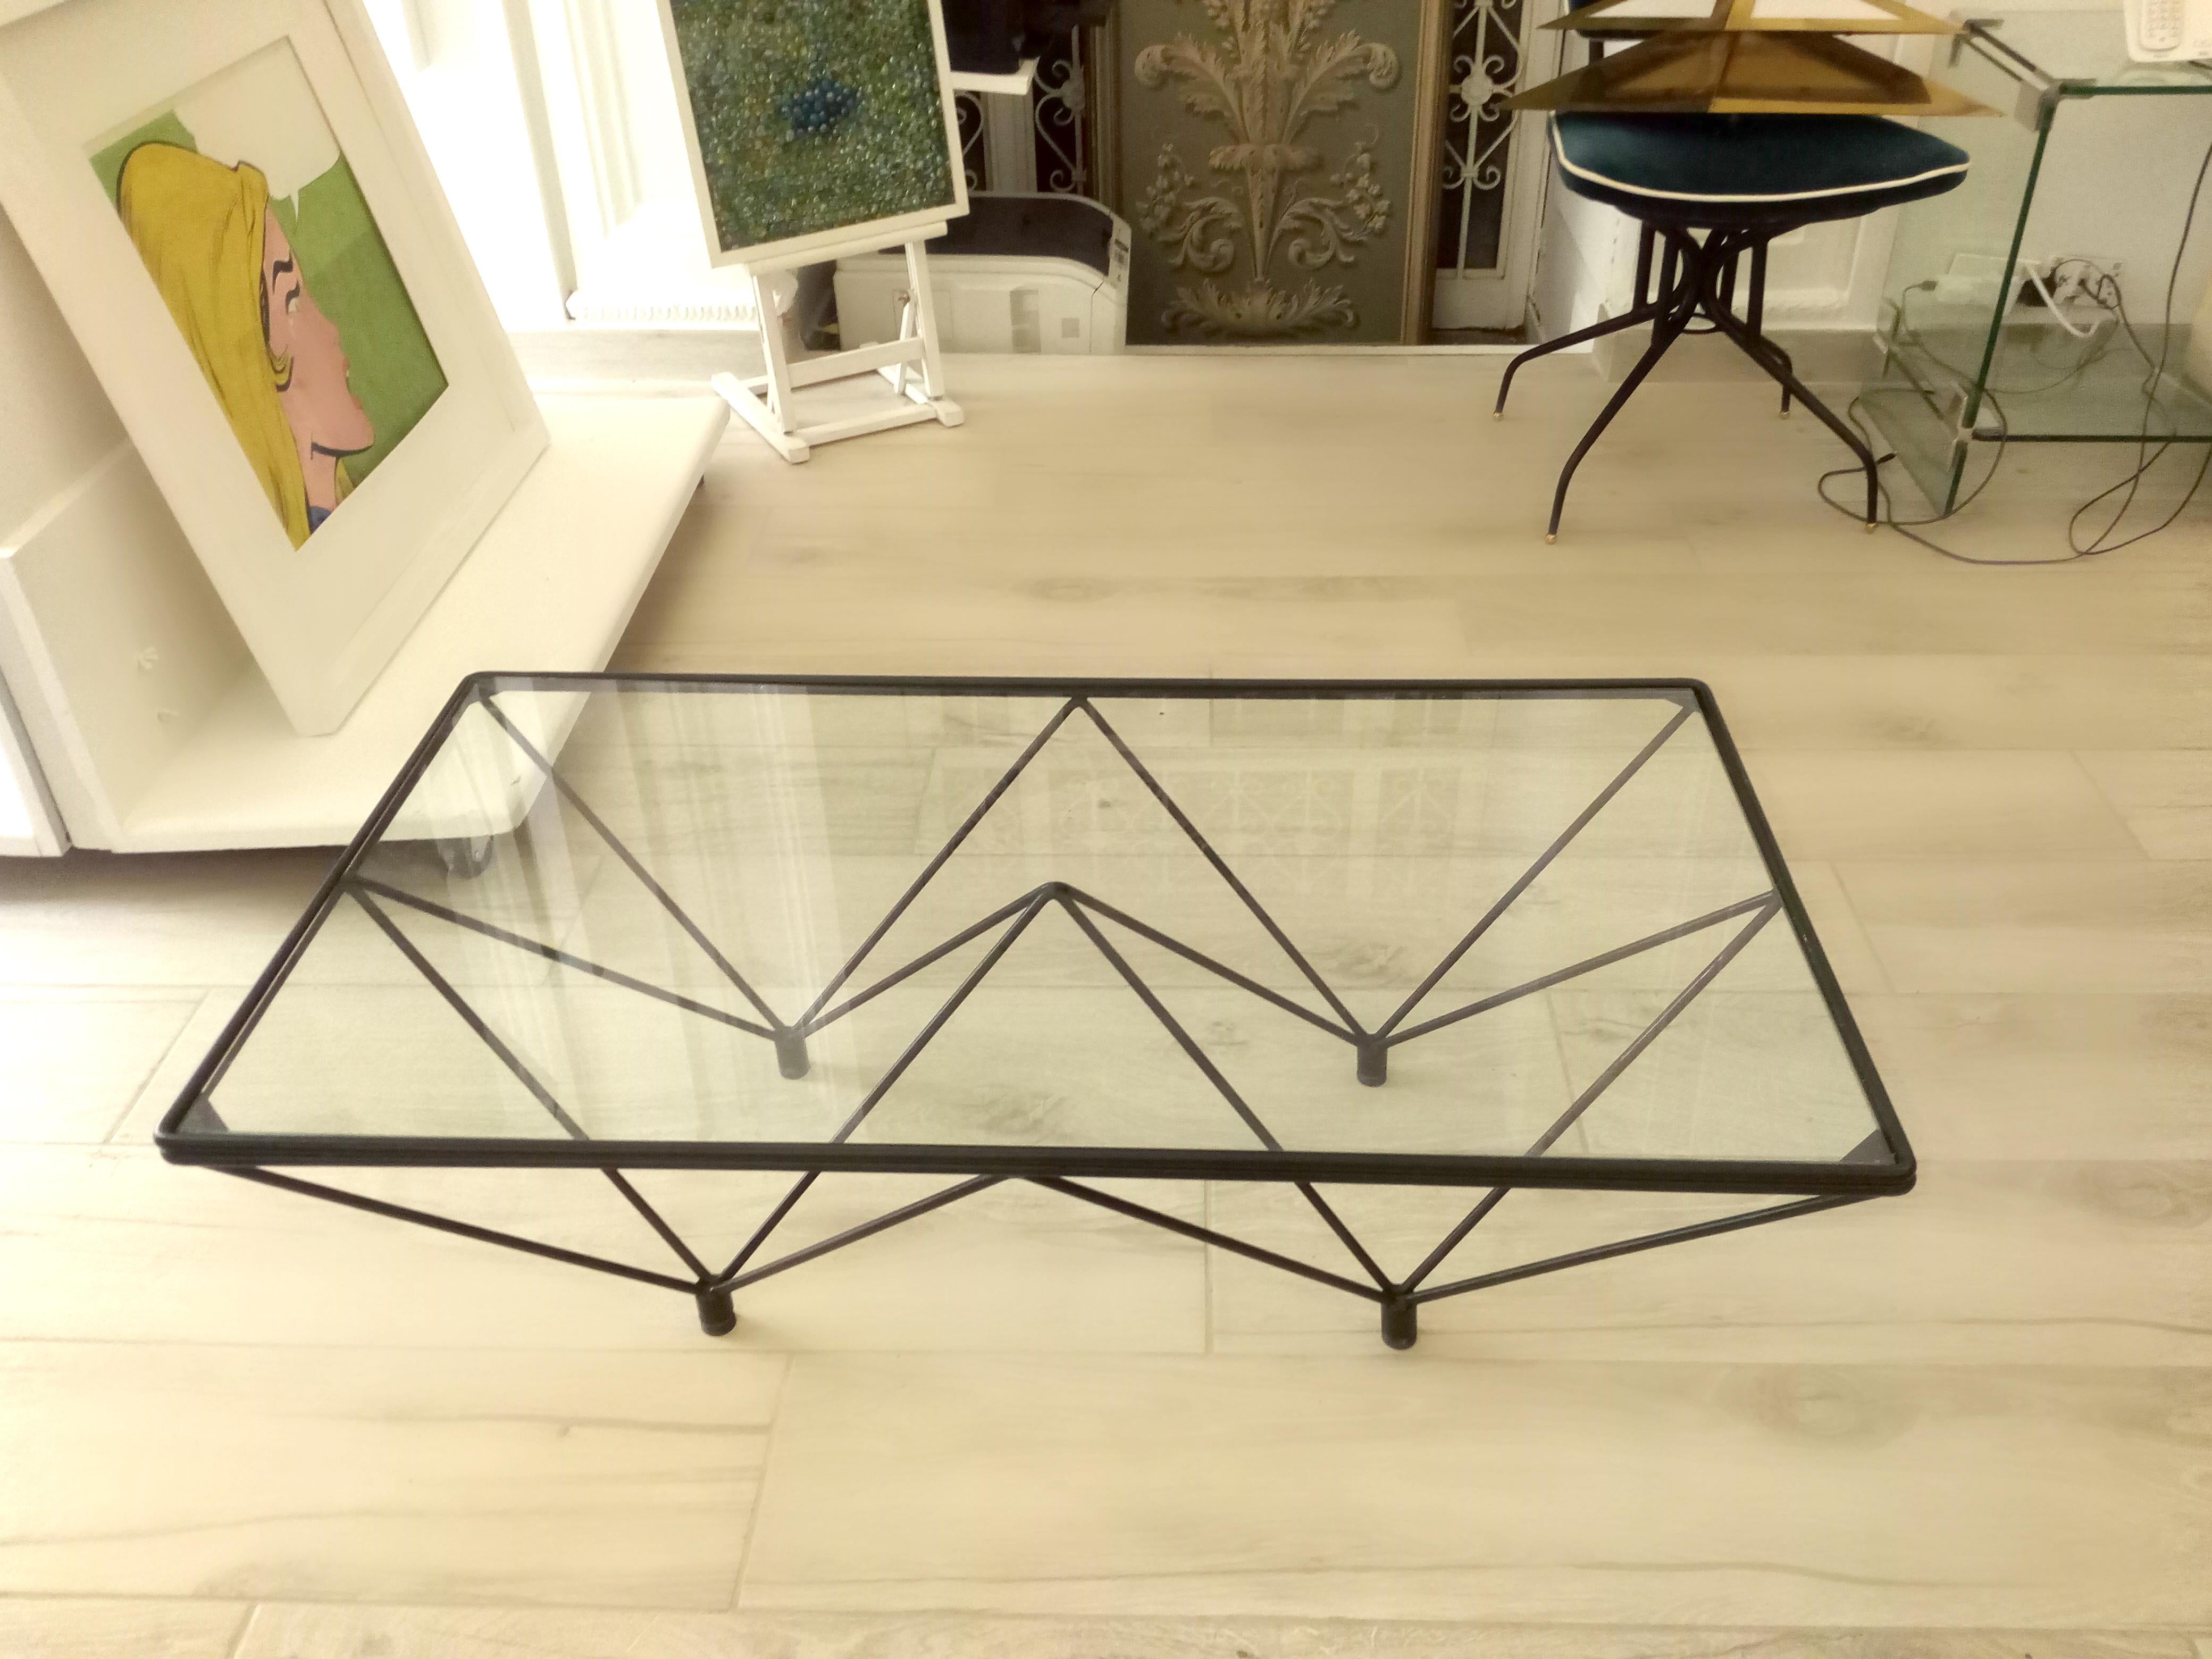 Mid-Century Modern Coffee Table, style of Paolo Piva for B & B Italia, circa 1980s